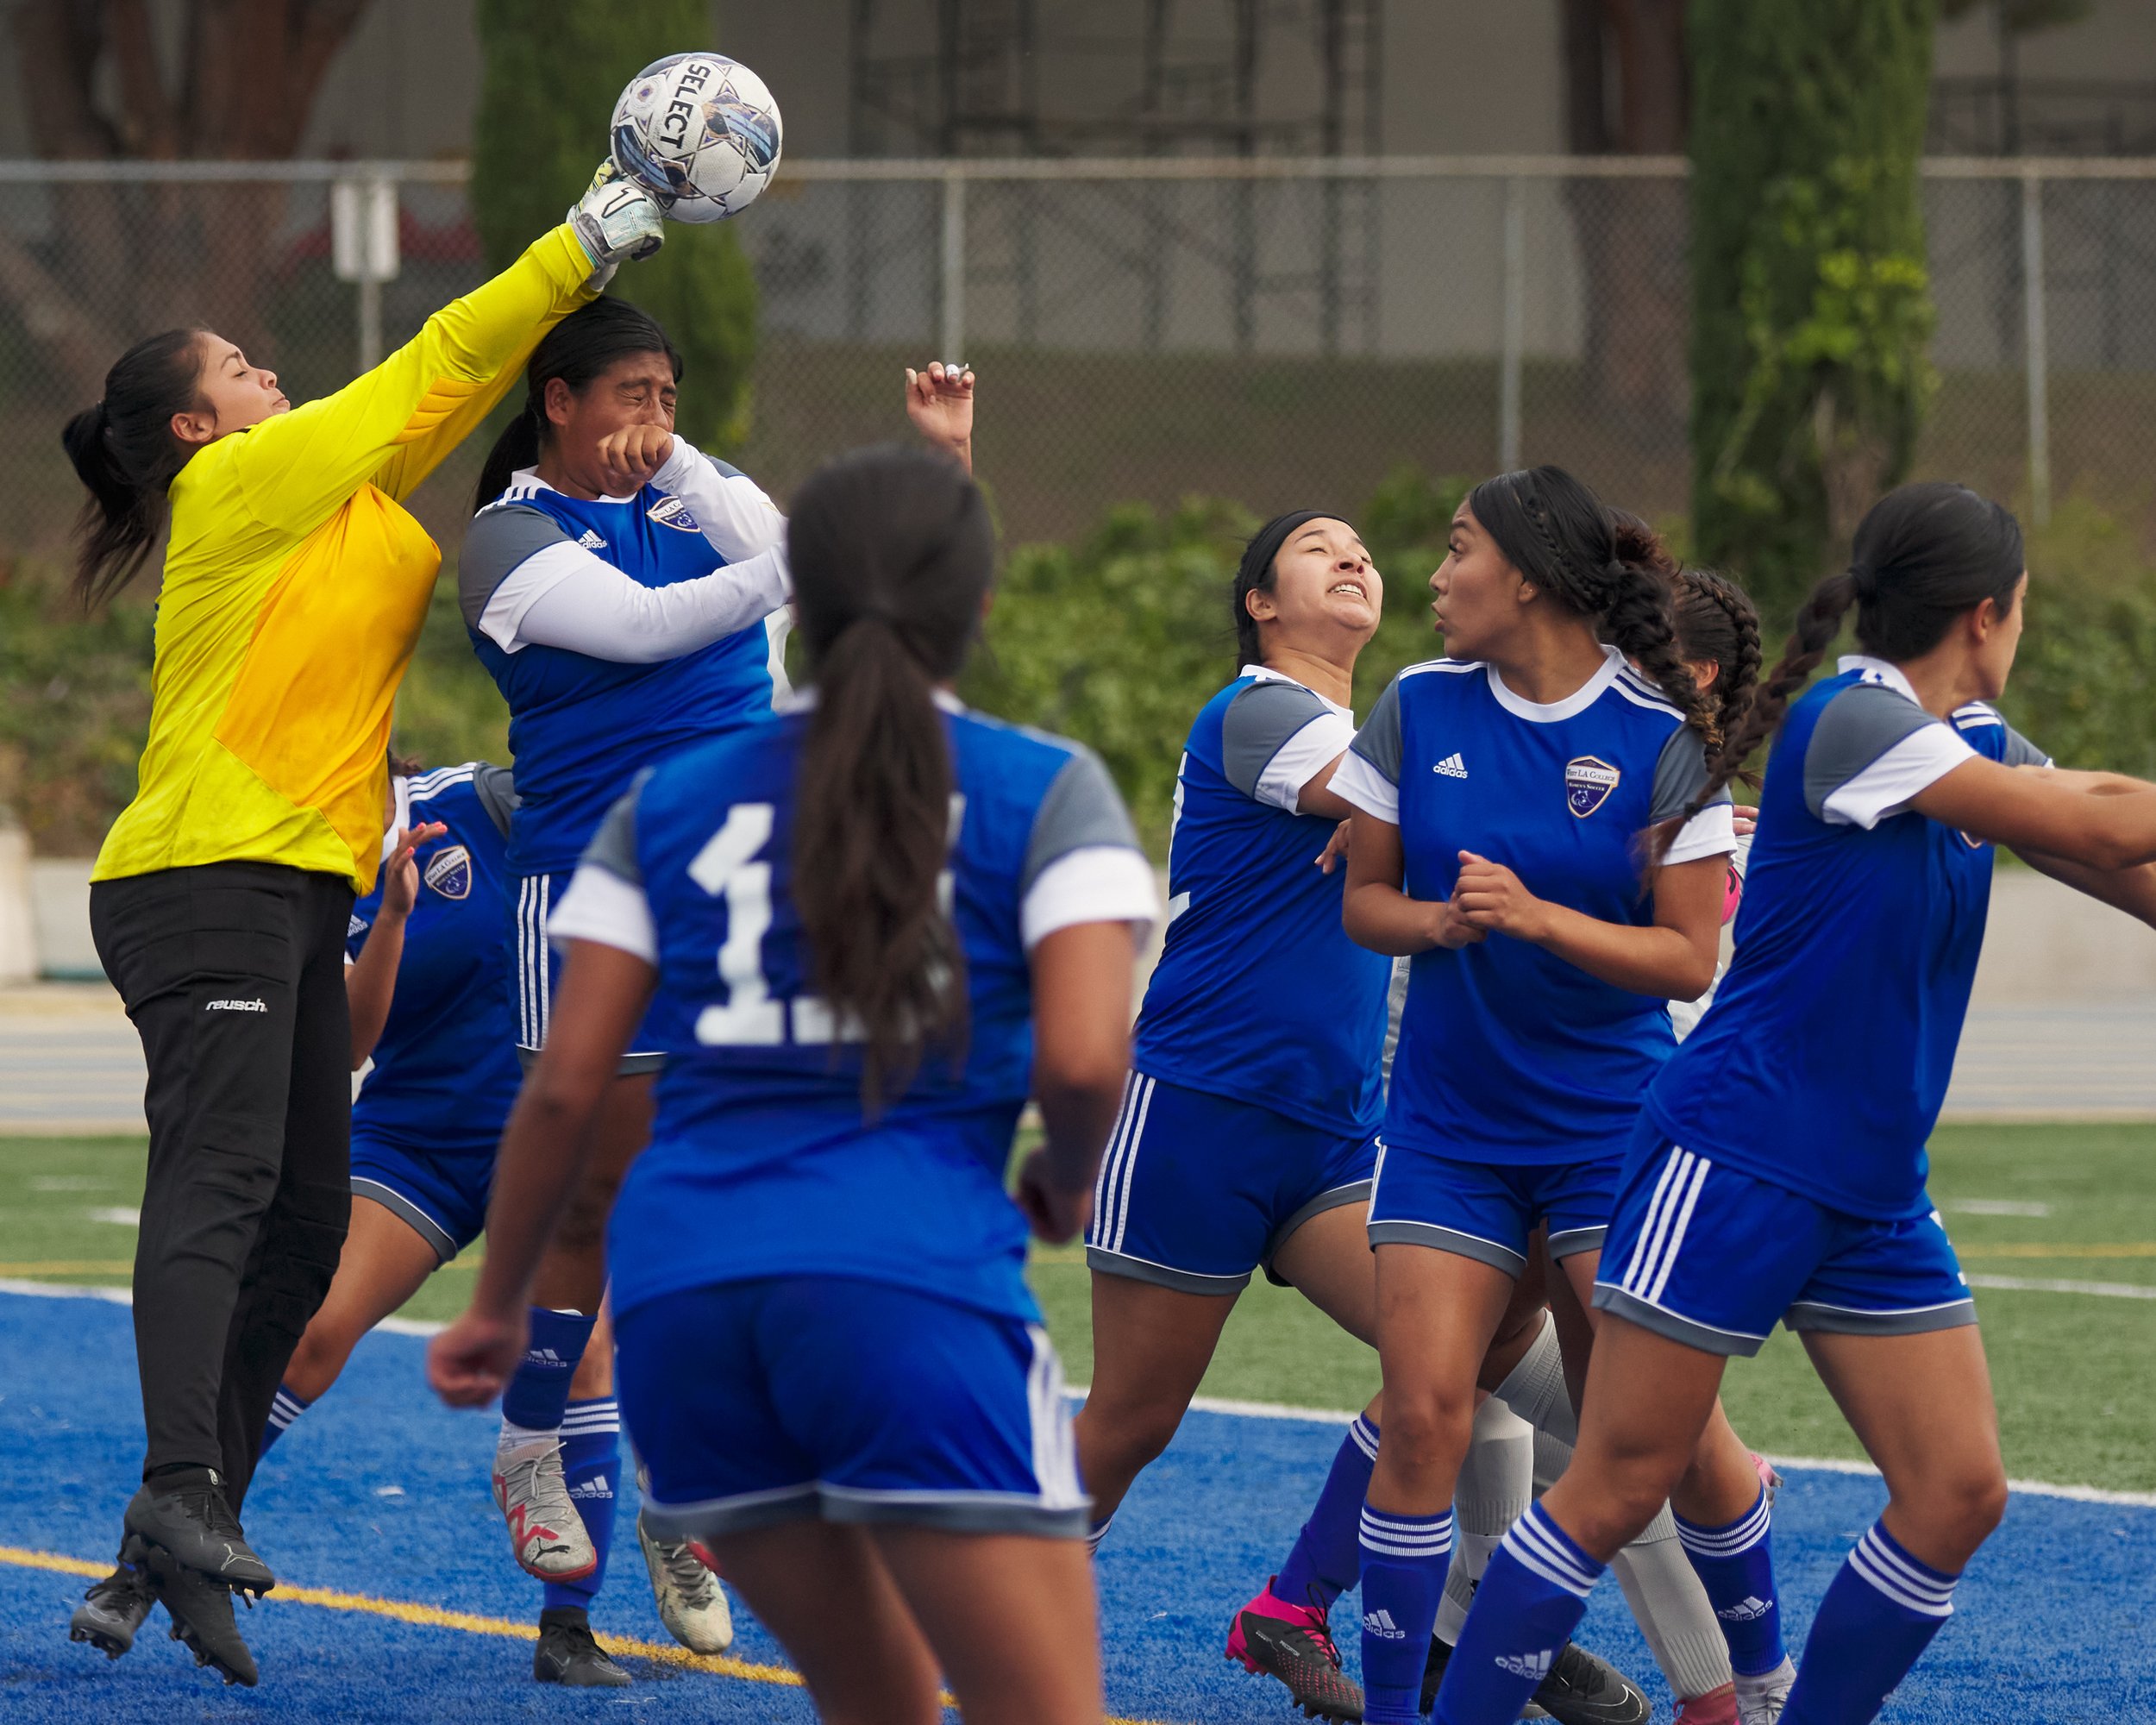  West Los Angeles College Wildcats' goalkeeper Jenna Sosa (left) blocks the ball during the women's soccer match against the Santa Monica College Corsairs on Friday, Sept. 29, 2023, at Wildcat Stadium in Los Angeles, Calif. The Corsairs won 5-0. (Nic